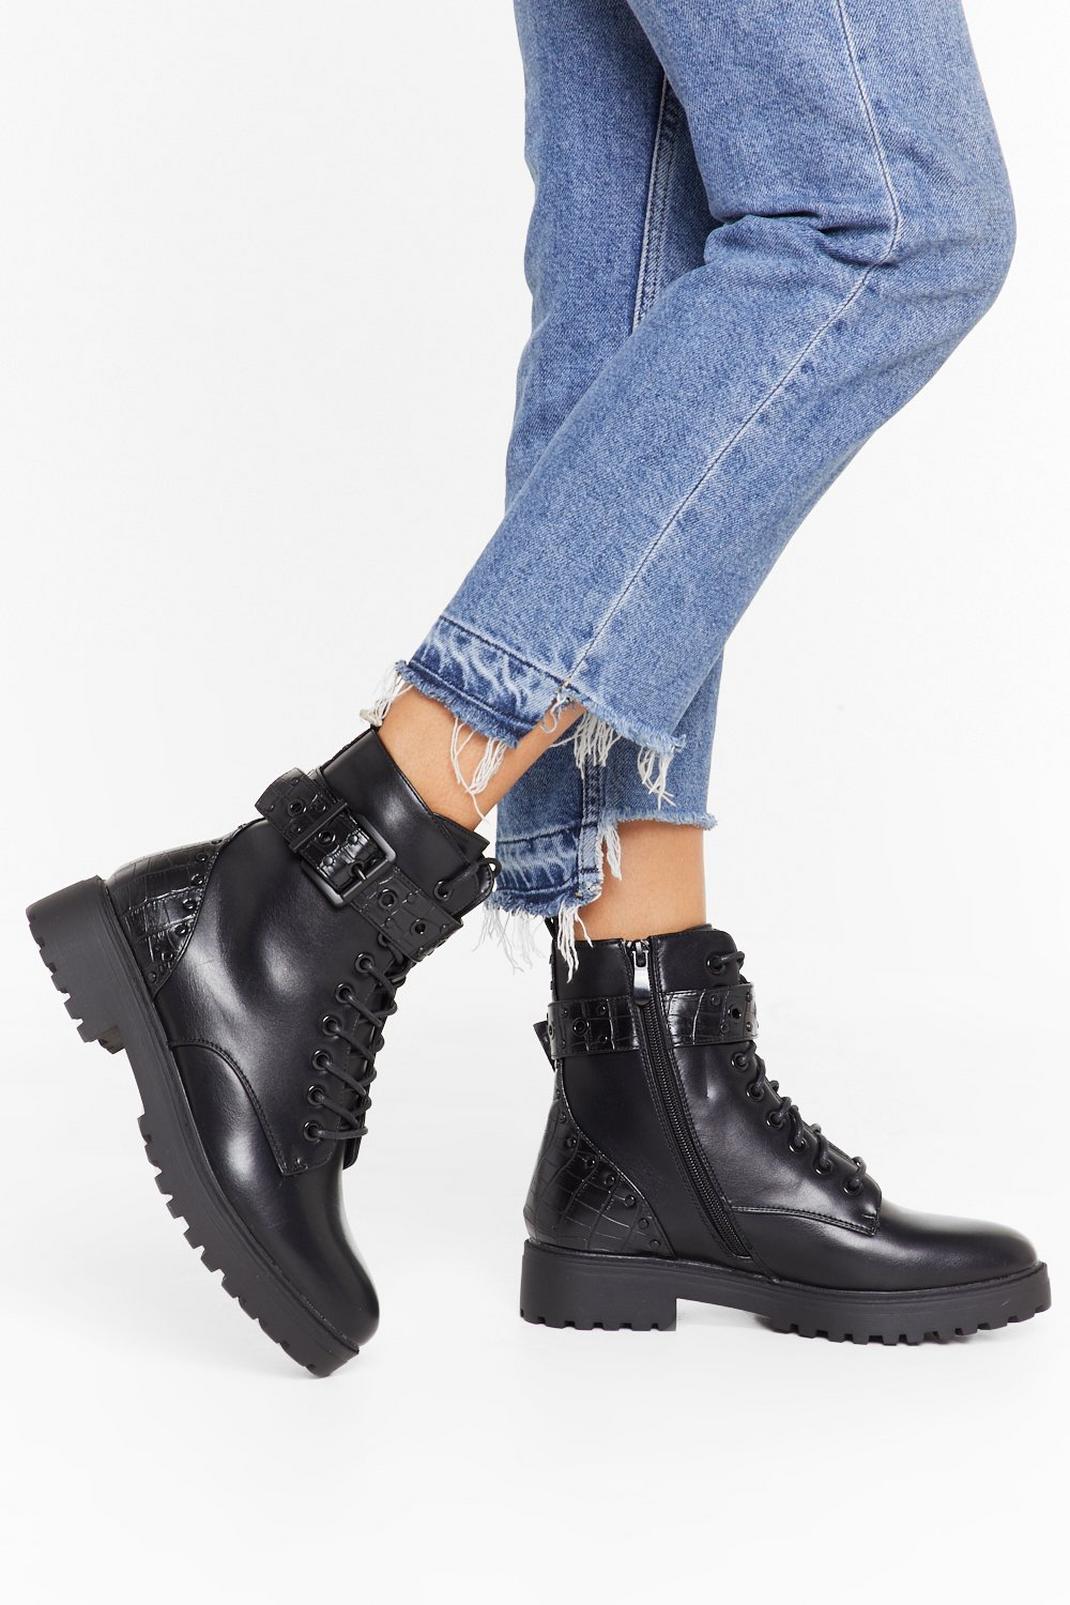 Gimme Some Stud News Faux Leather Biker Boots image number 1